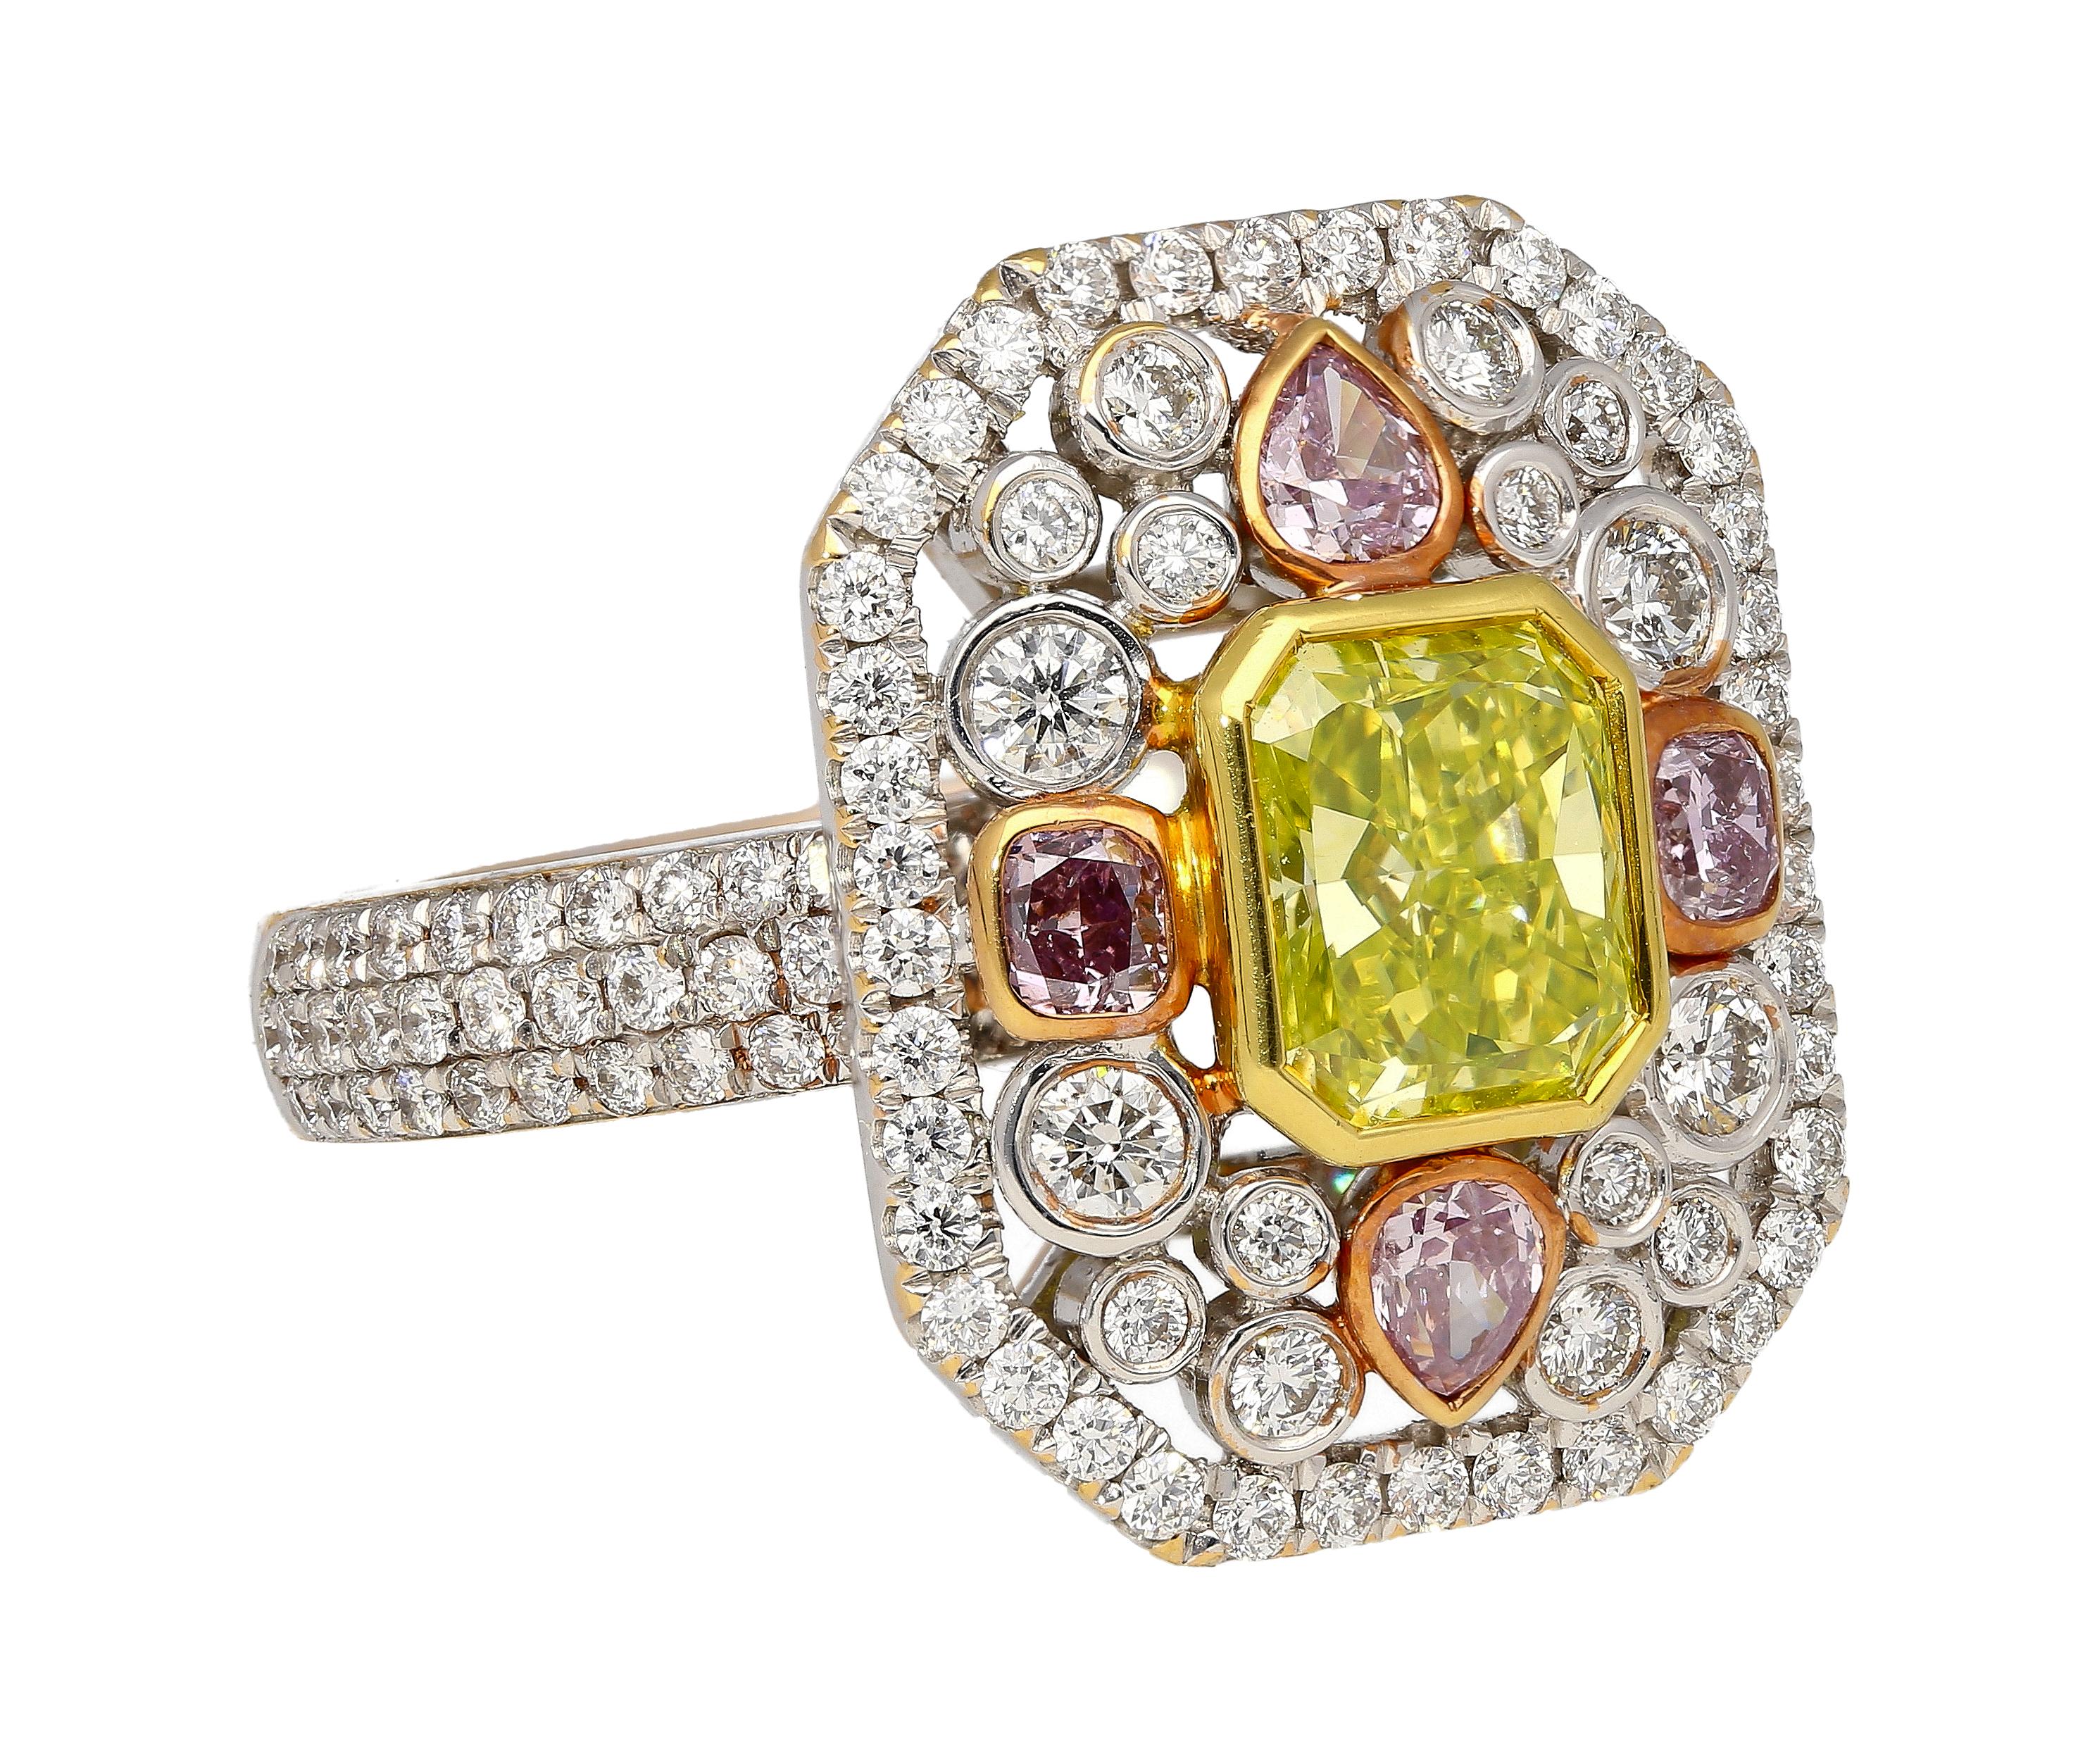 18k tri-colored gold long frame rectangular shaped ring with multi-colored natural diamonds. Featuring a GIA certified 1.15 carat Fancy Intense Yellowish Green radiant cut with even distribution and VS1 clarity. The long vertical frame sits